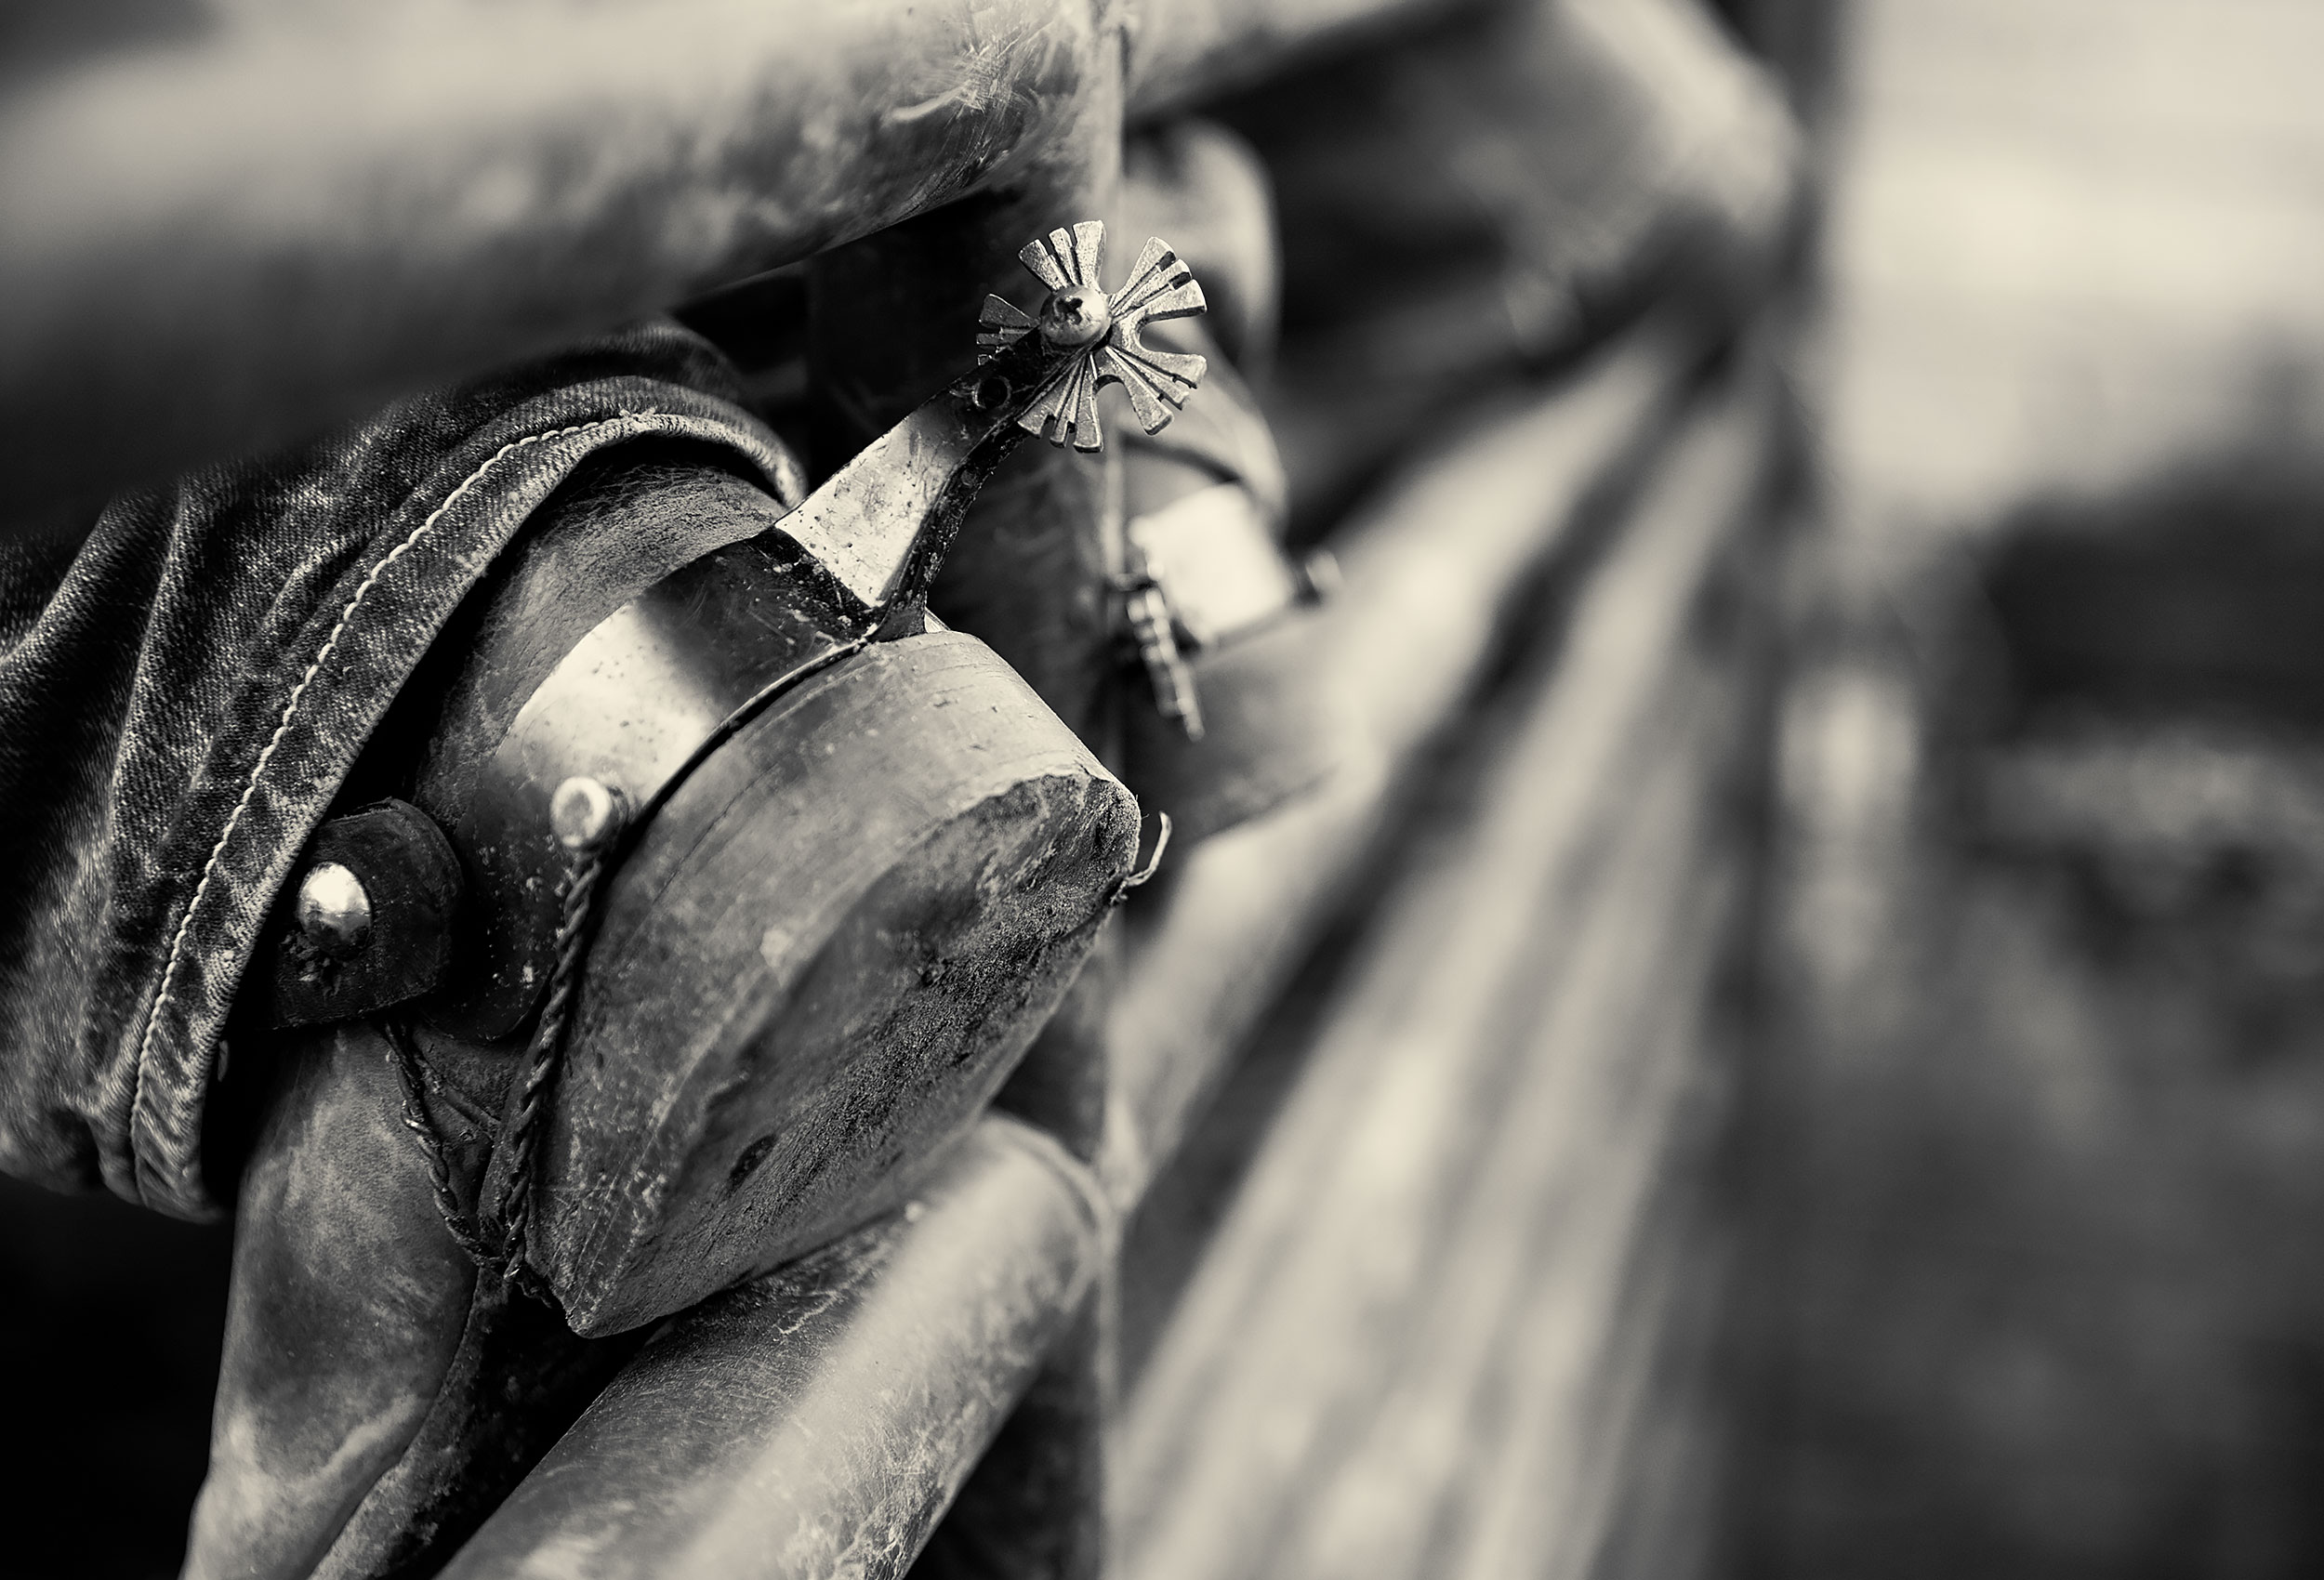 Black and white image of a detail of a cowboy boot and spur